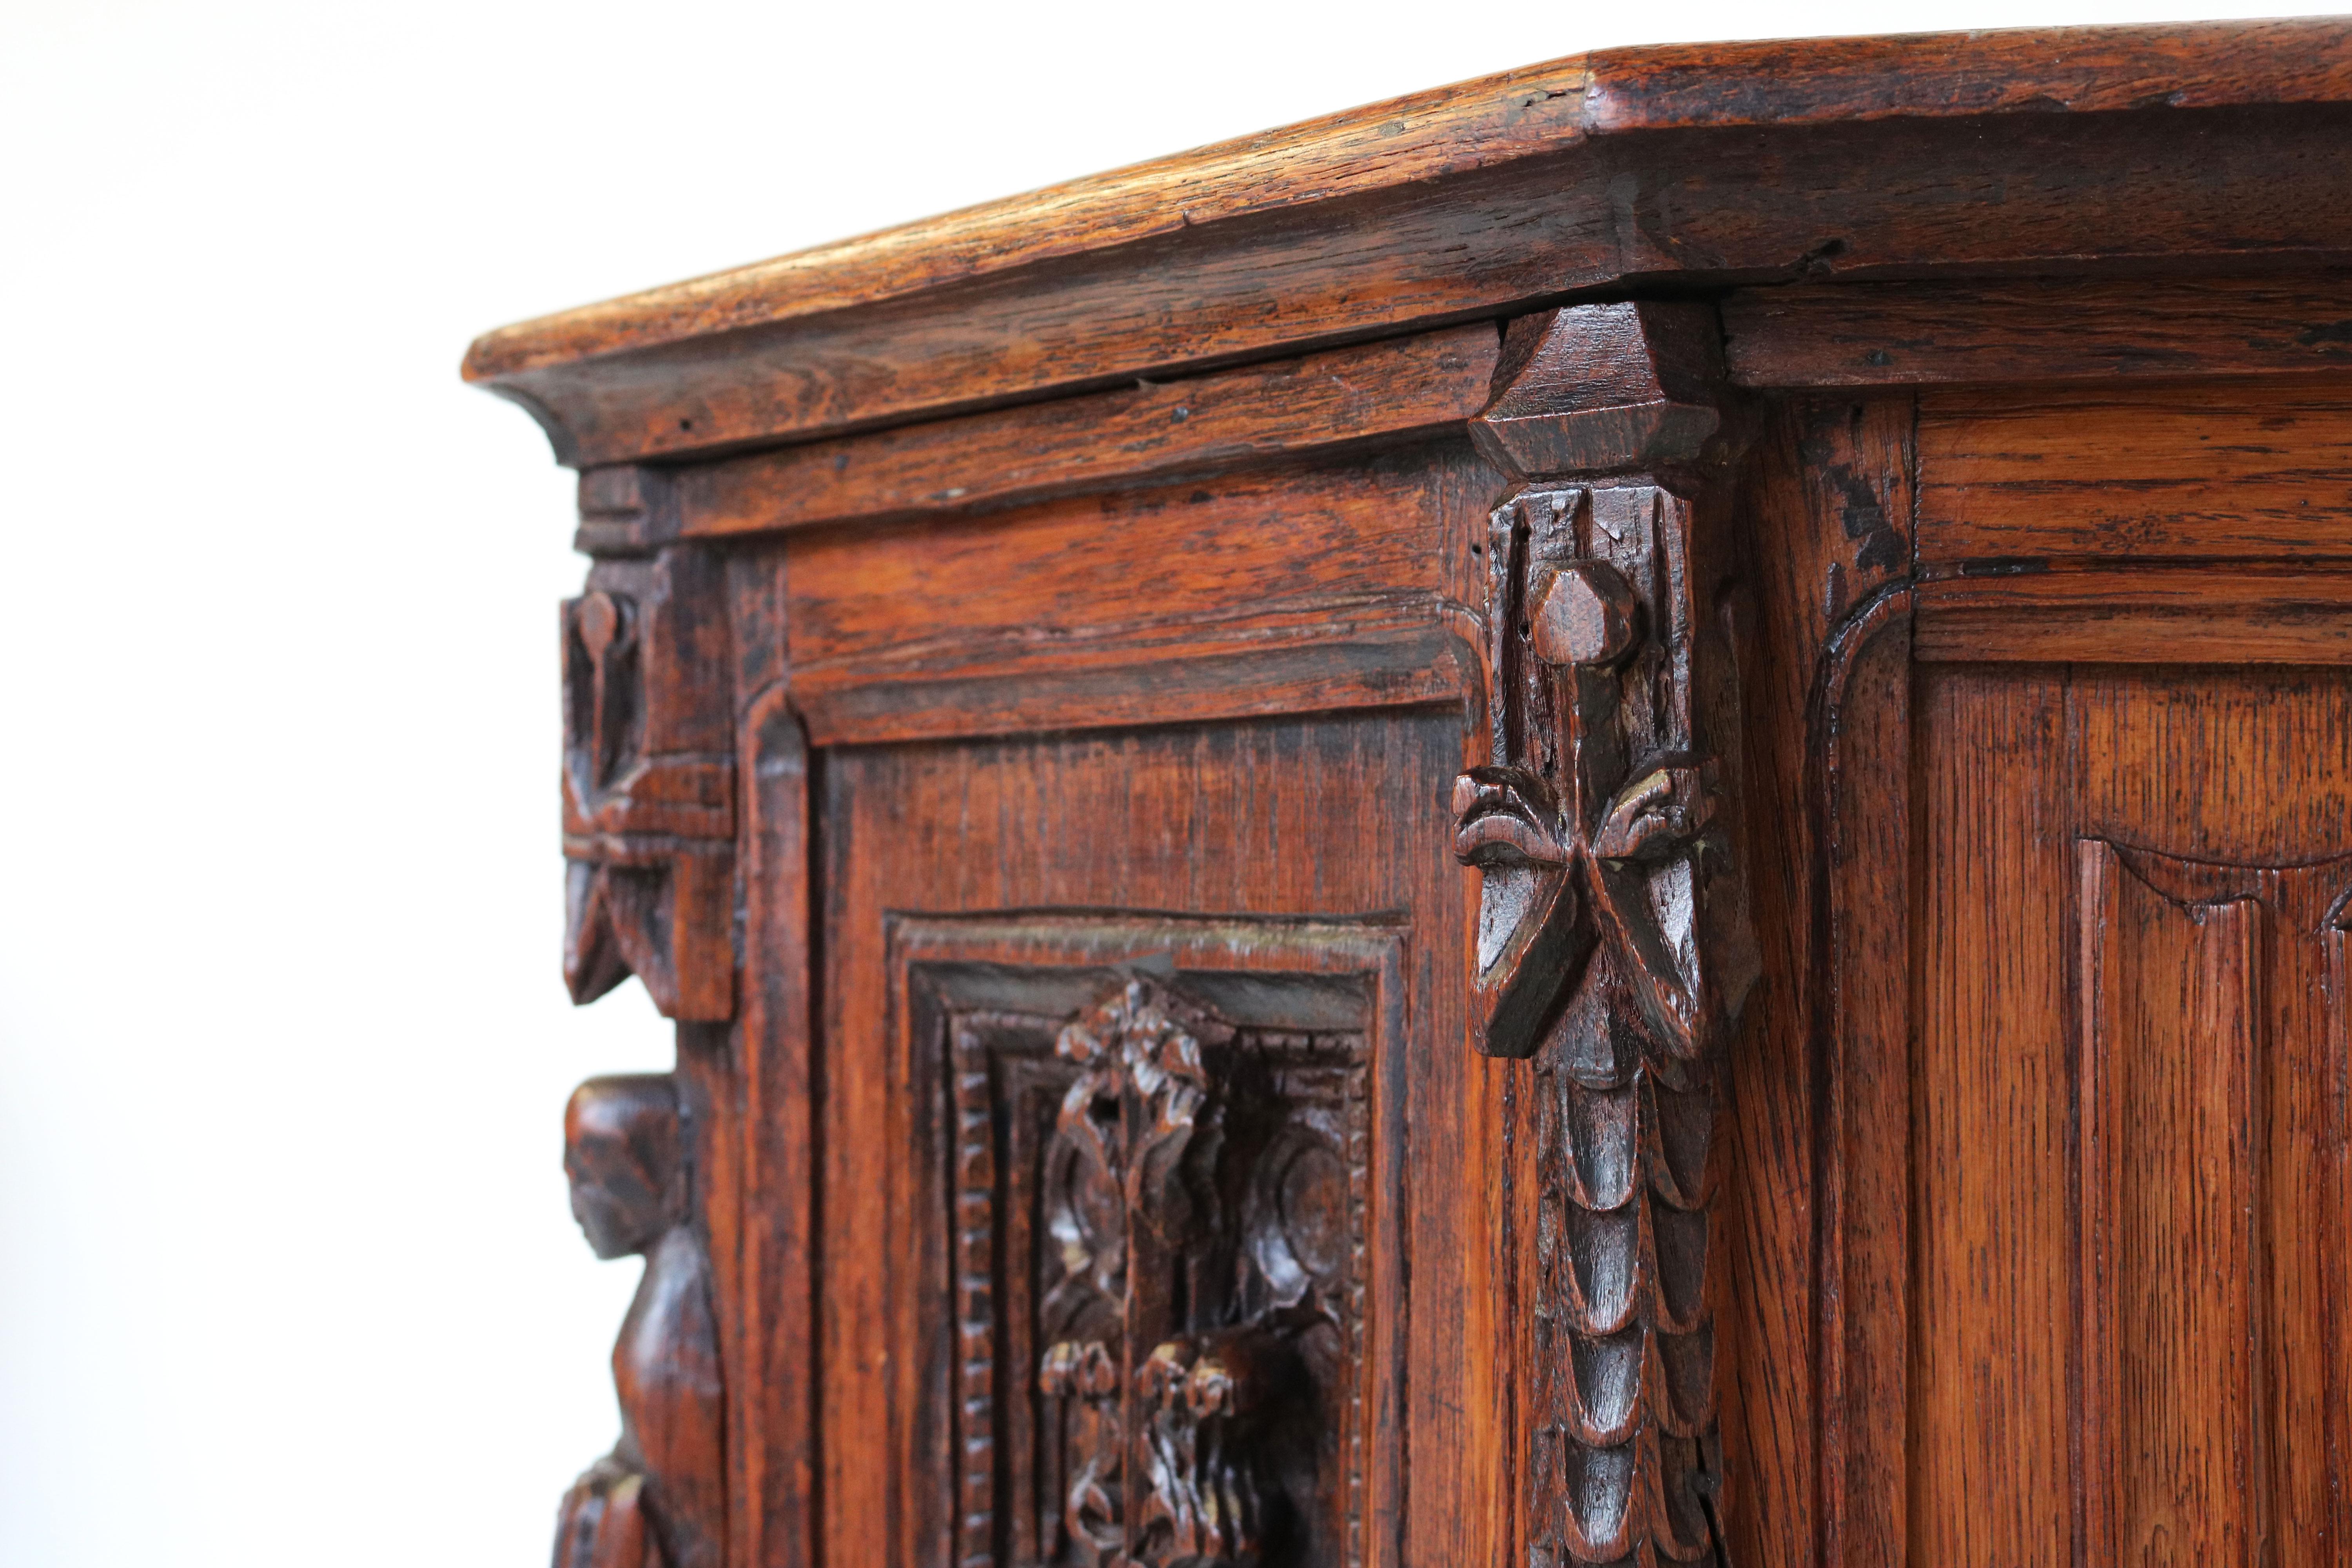 Carved Small Antique Gothic Revival Hexagonal Cabinet 19th Century French Oak Figures